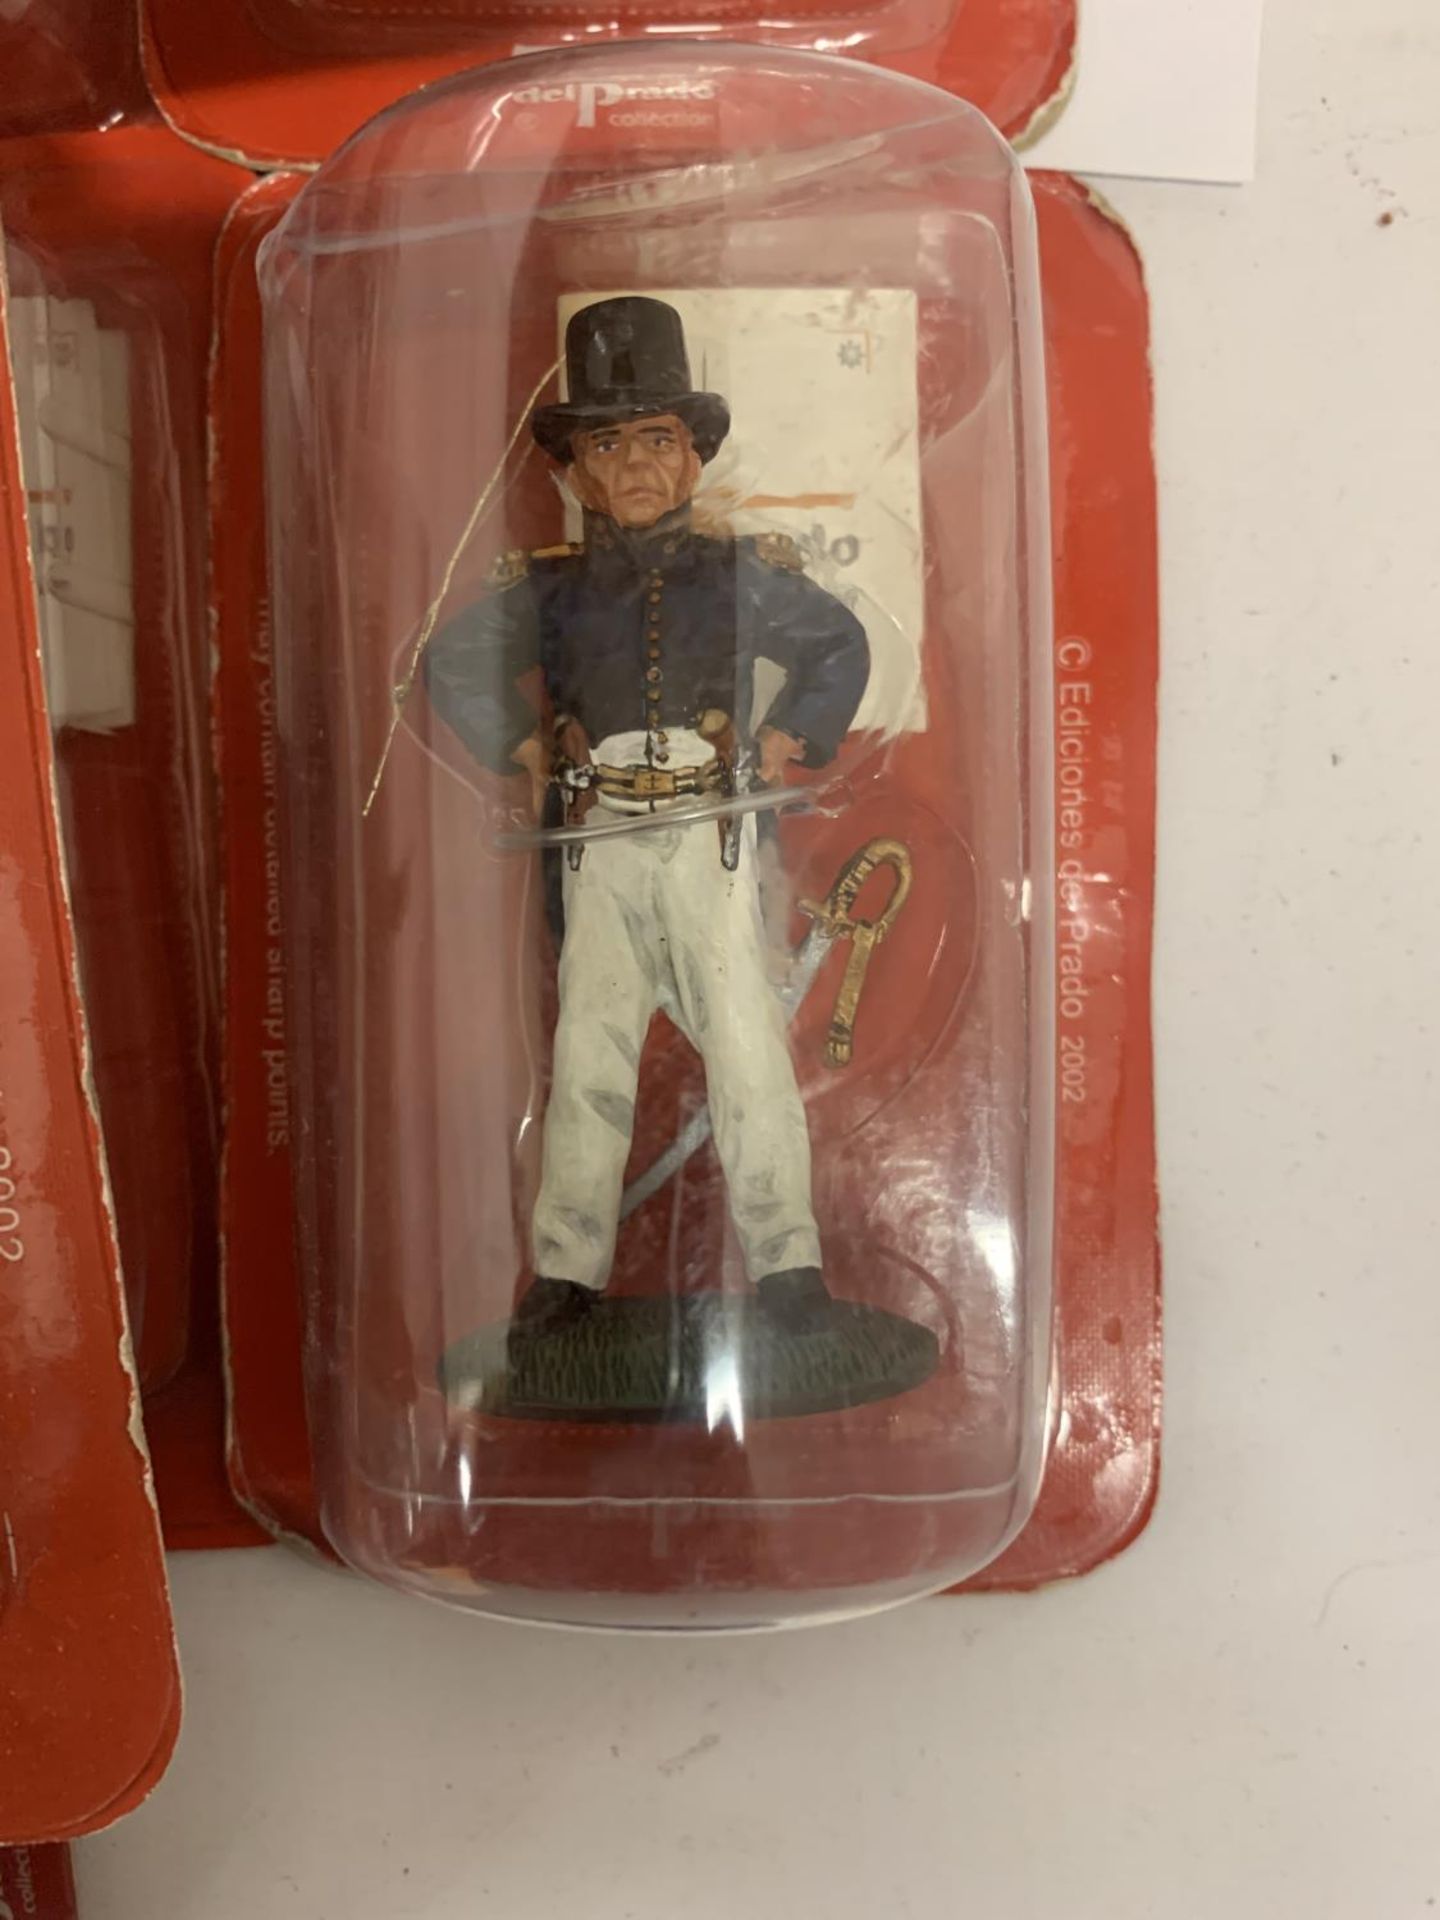 A LARGE COLLECTION OF DEL PRADO MILITARY FIGURES IN BLISTER PACKS - Image 7 of 8